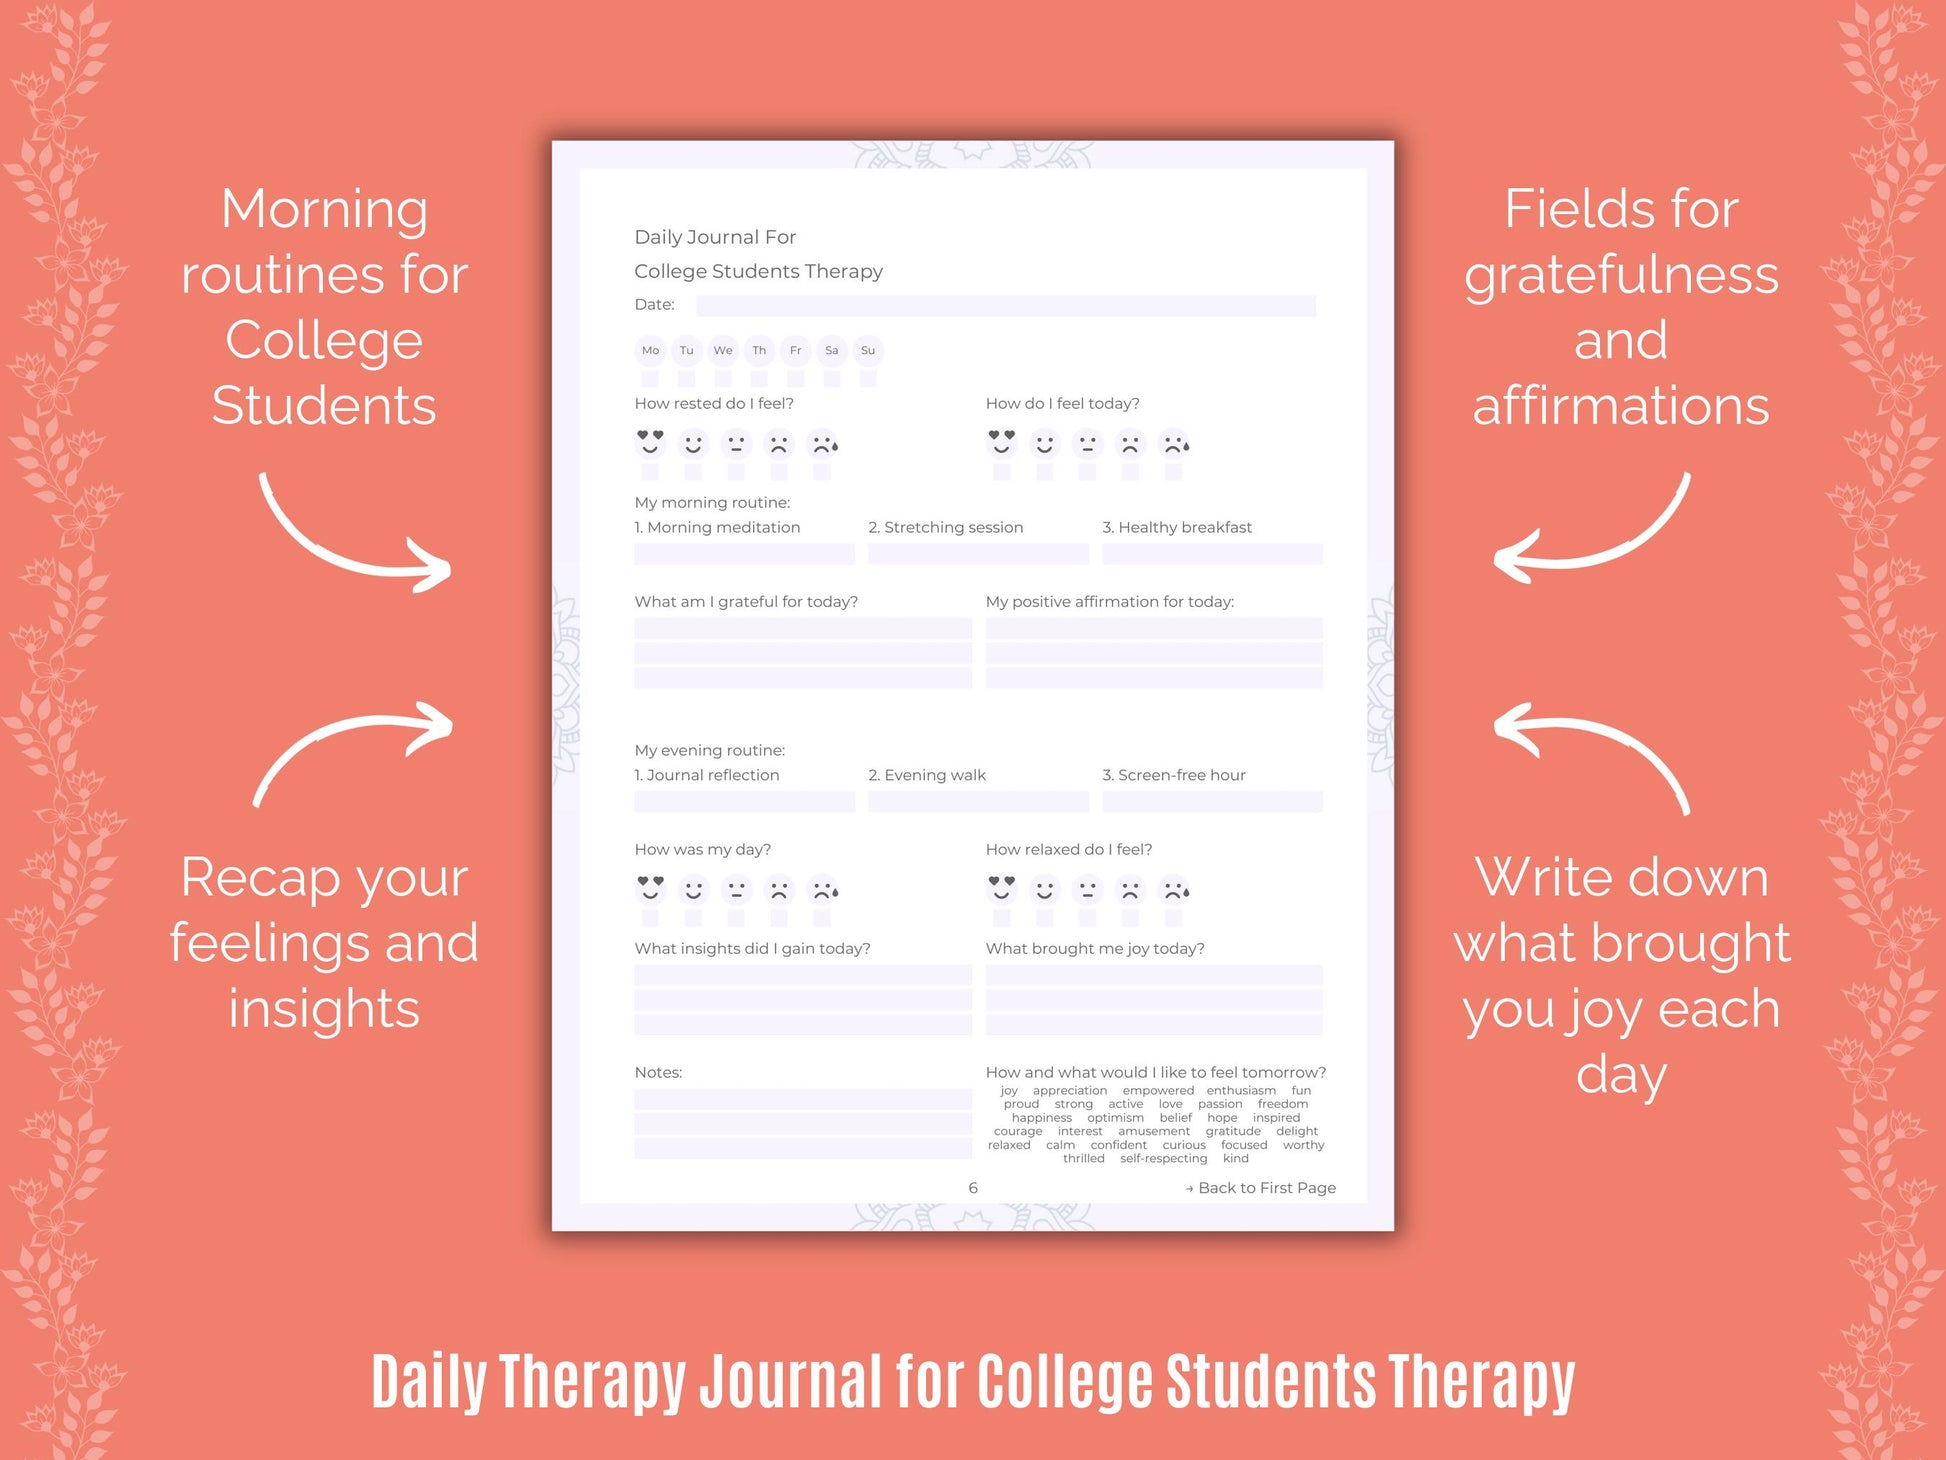 College Counseling, College Workbooks, College Goal Setting, College Journals, College Cheat Sheet, College Planners, College Templates, College Tools, College Resources, College Therapy, College Journaling, Student, College Notes